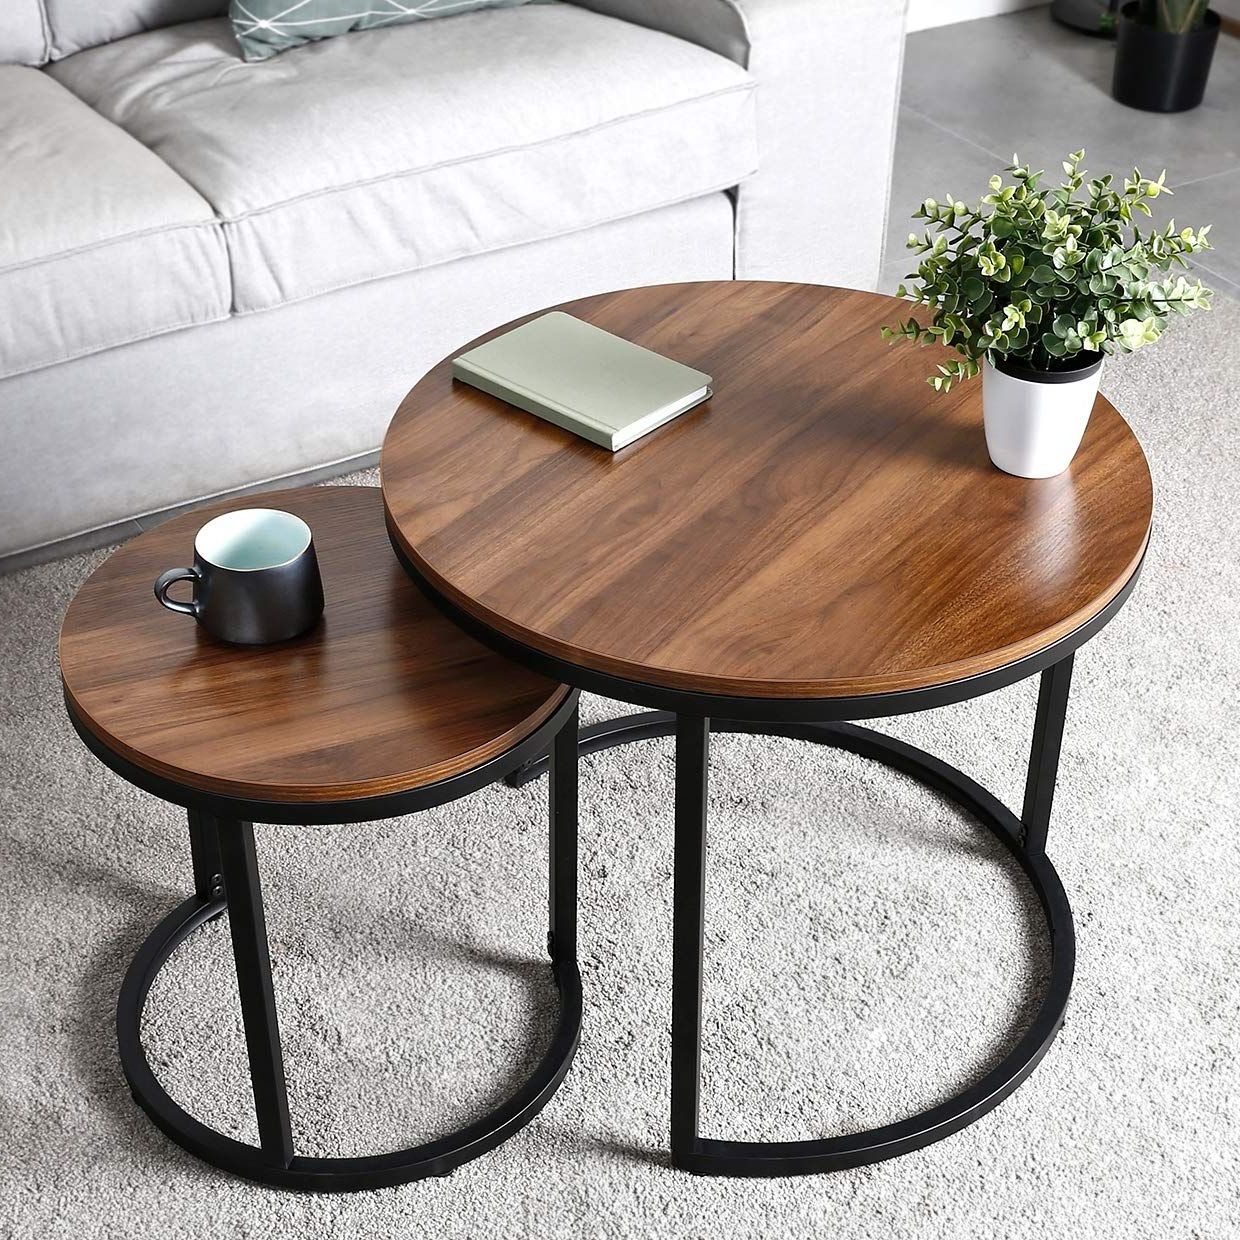 Amazonsmile: Amzdeal Coffee Table For Living Room, Set Of With Regard To Newest 2 Piece Round Coffee Tables Set (View 13 of 20)